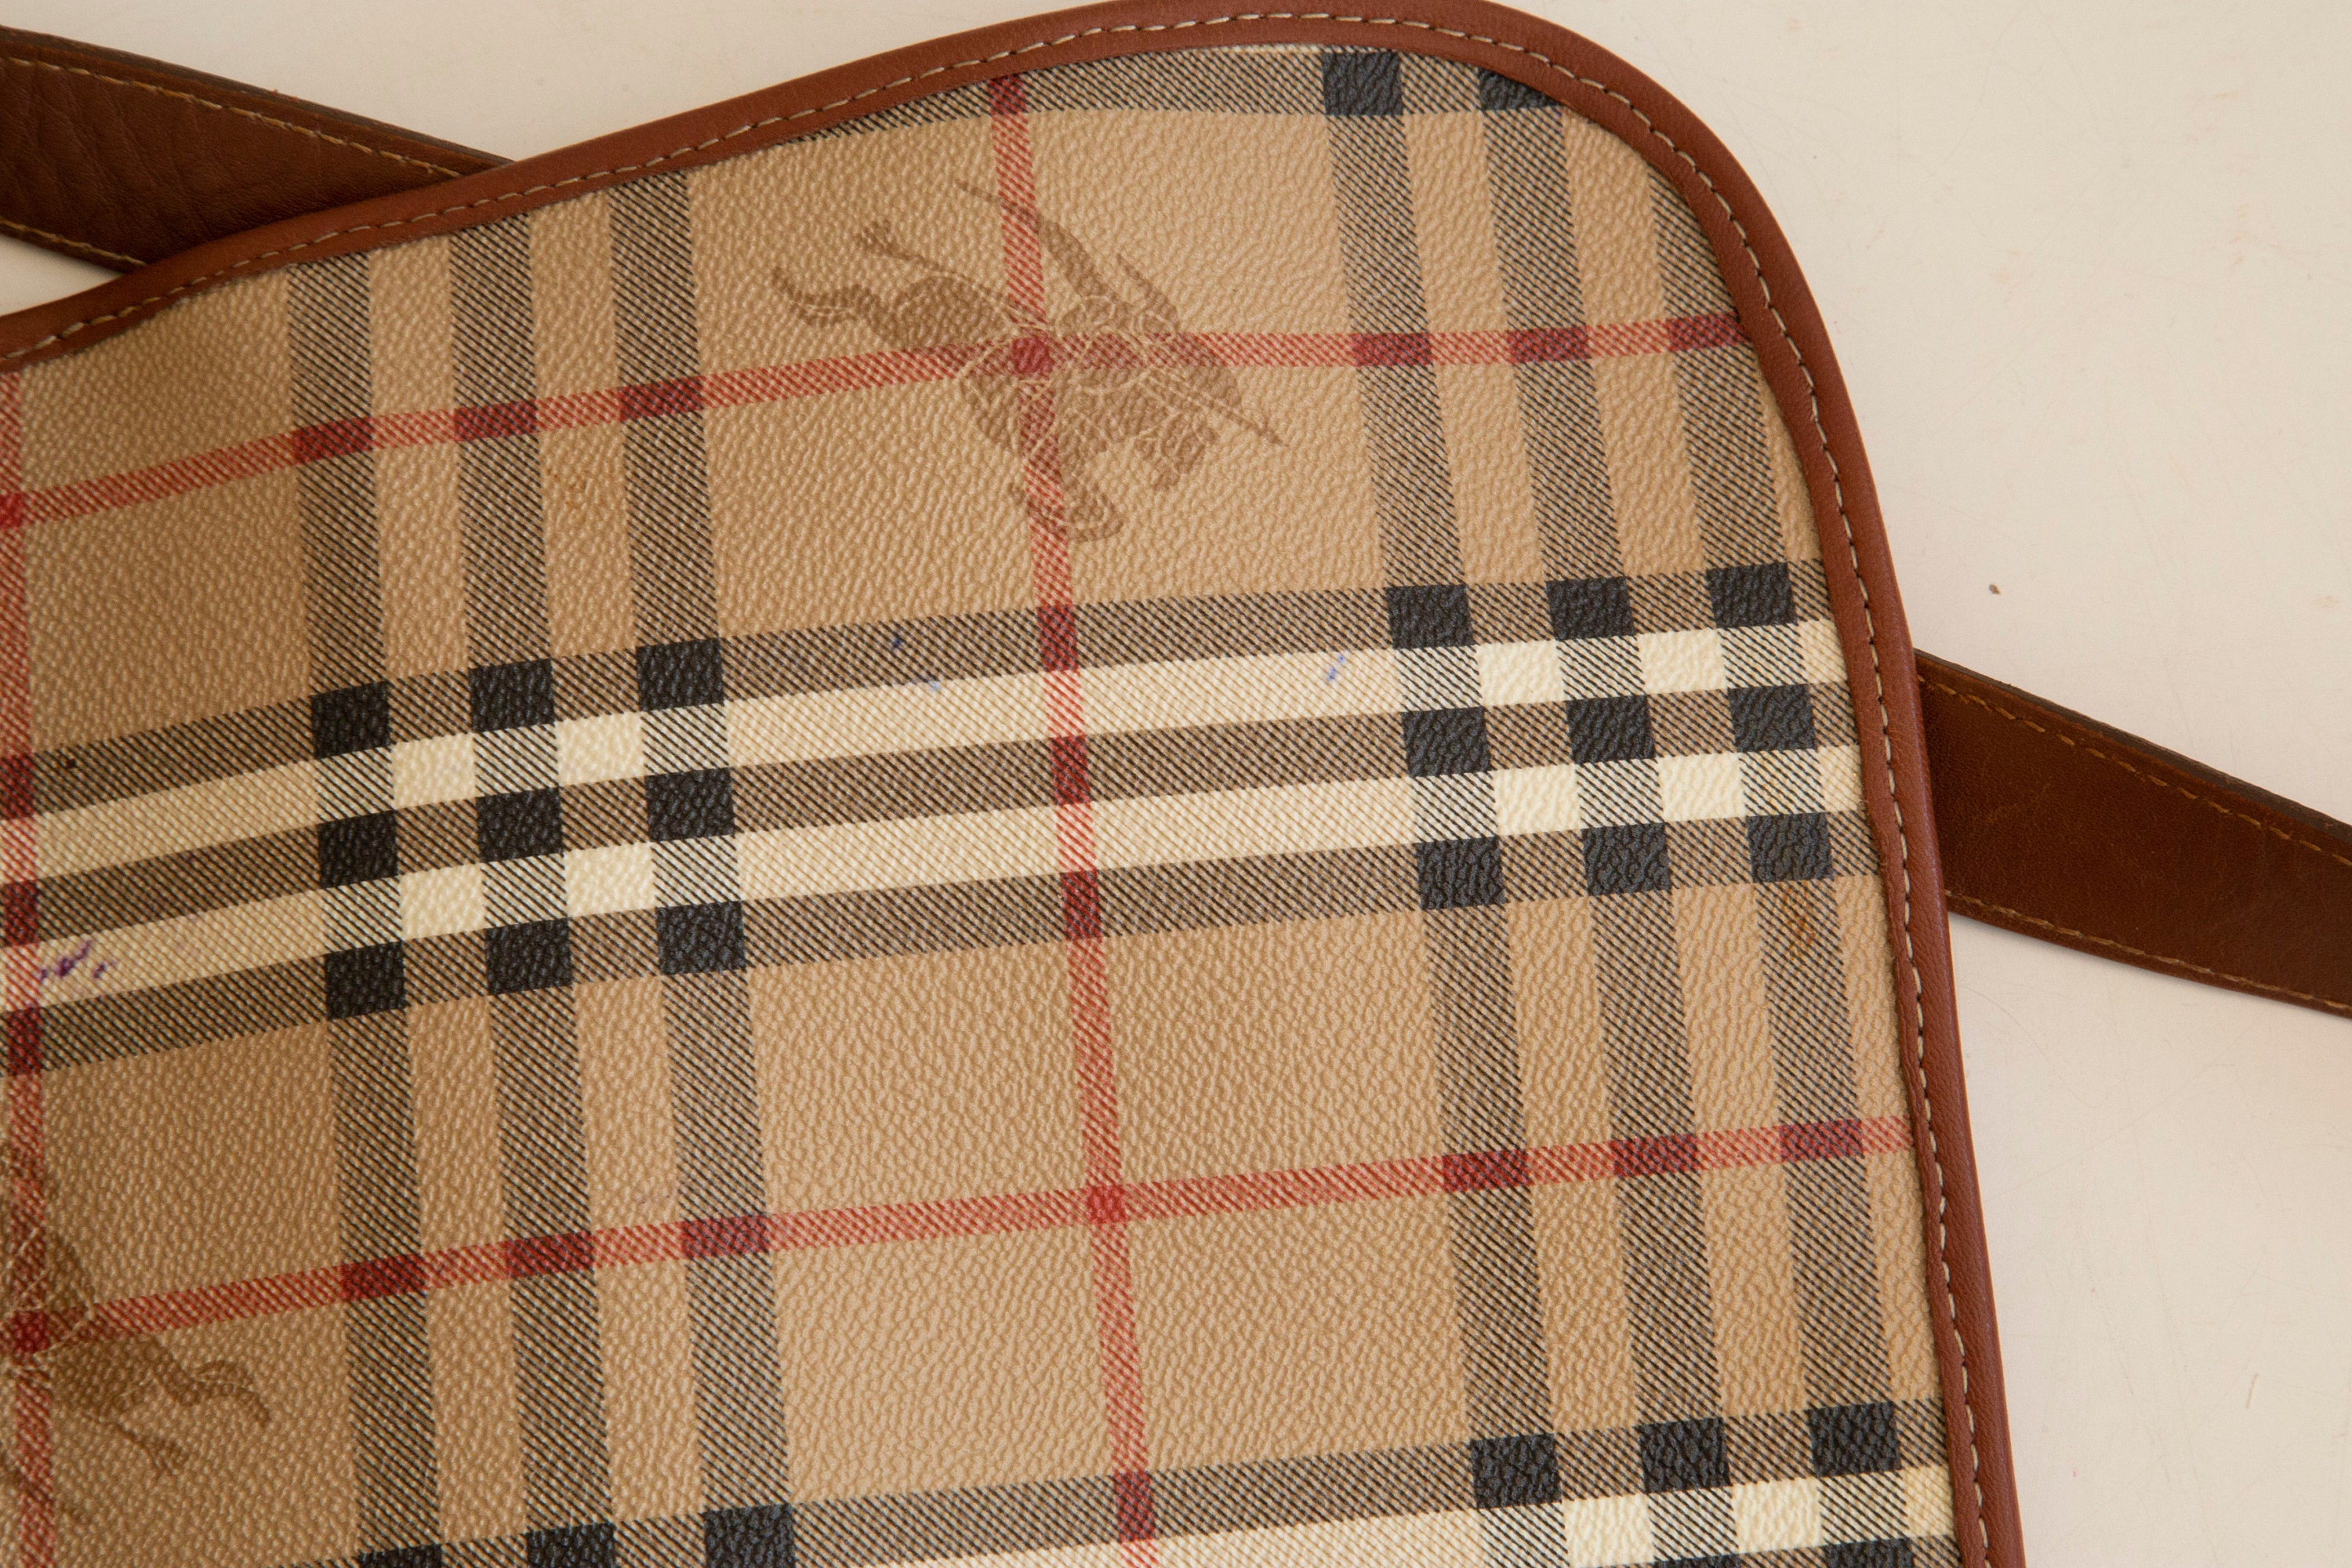 Burberry Classic Check Saddle Bag in Good Condition -  Canada